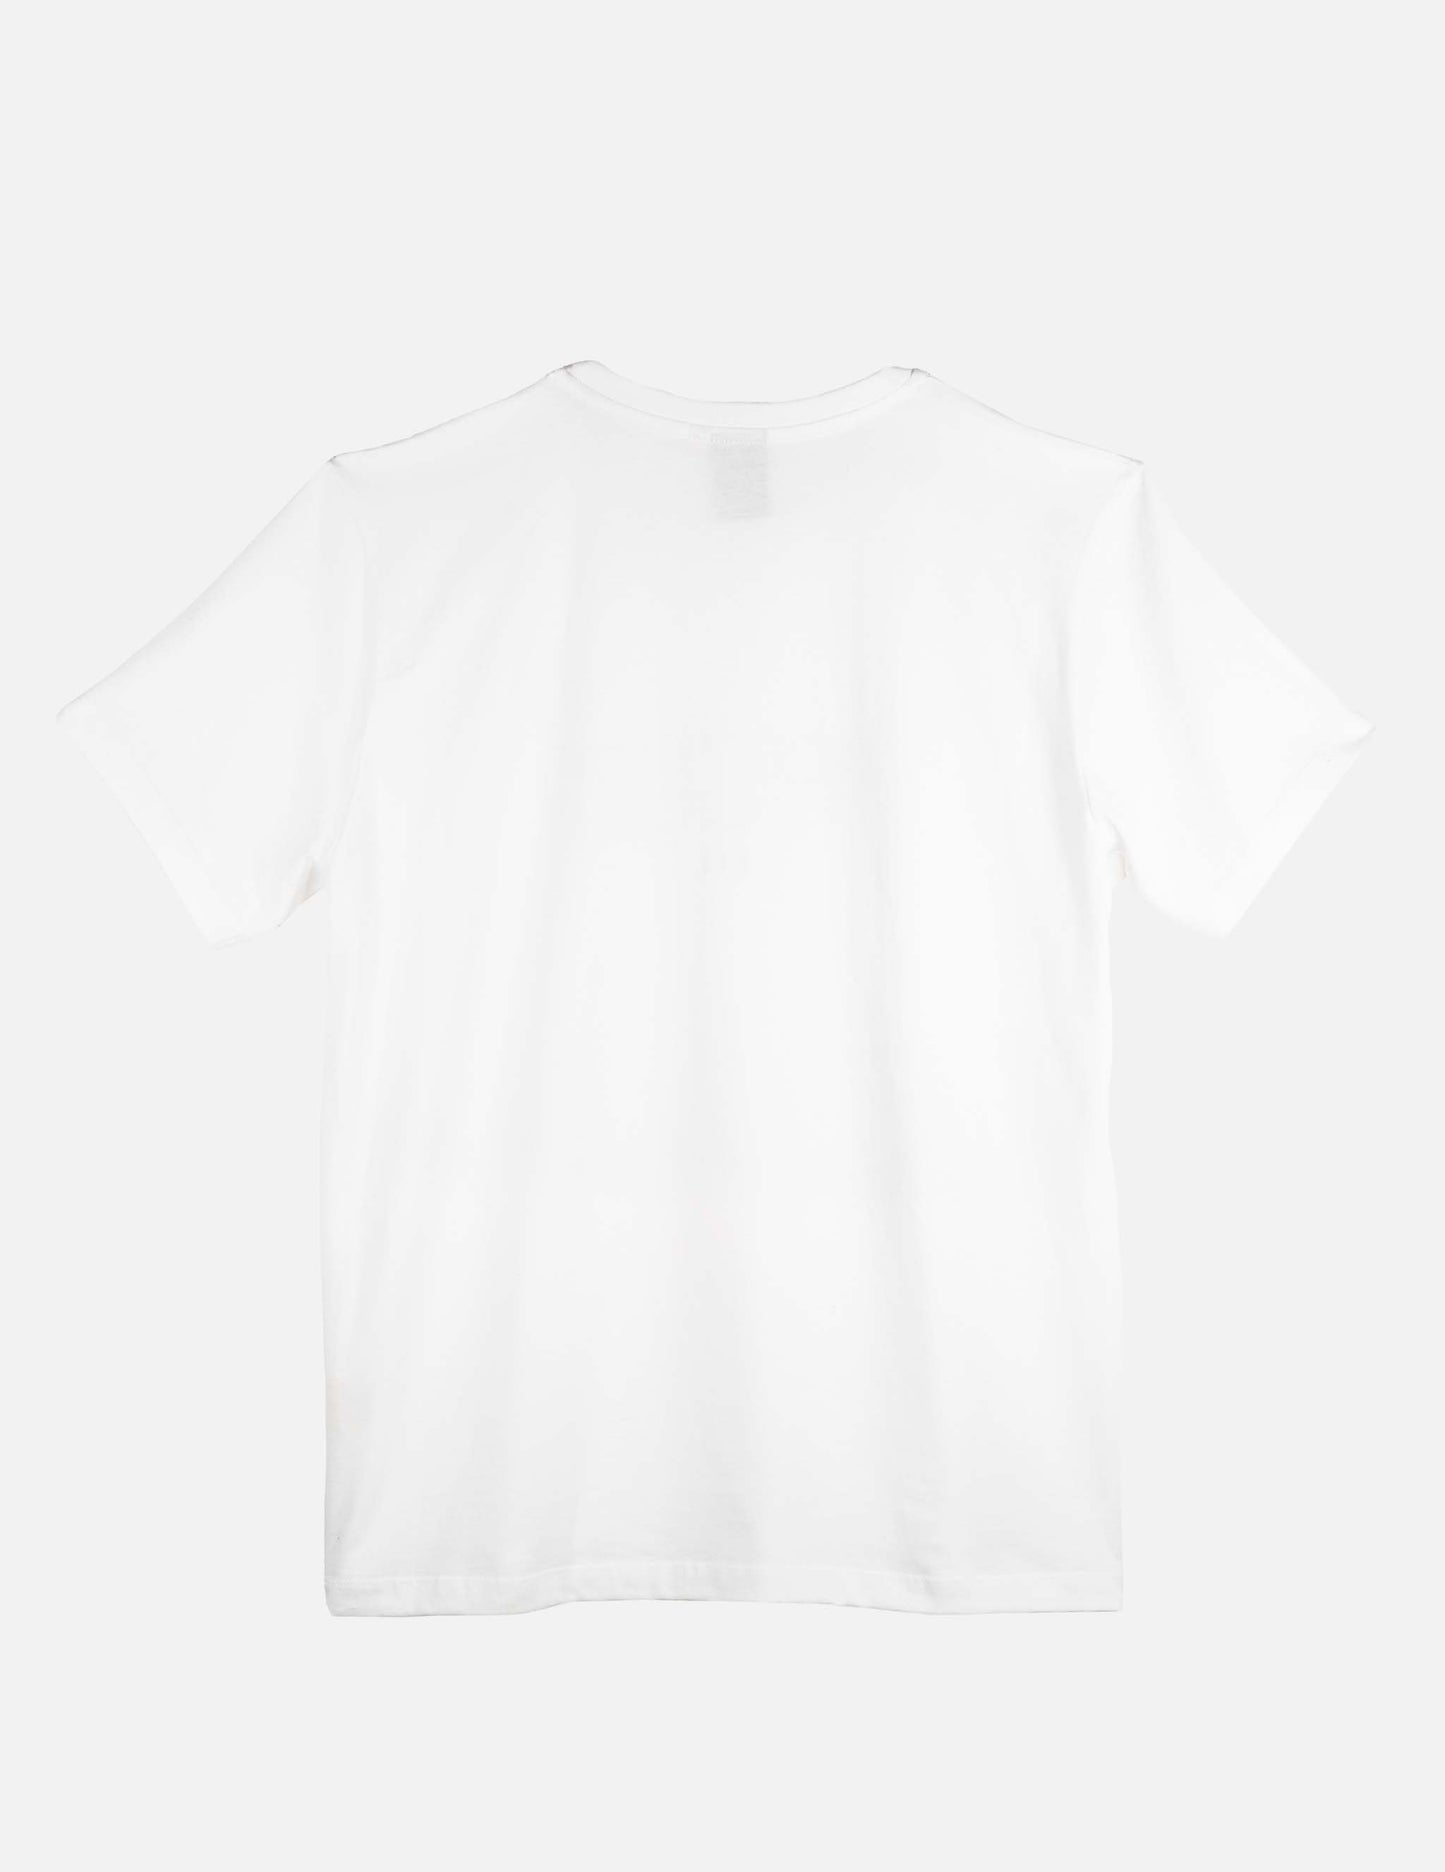 VOGUE T-SHIRT PACK - Limited Edition